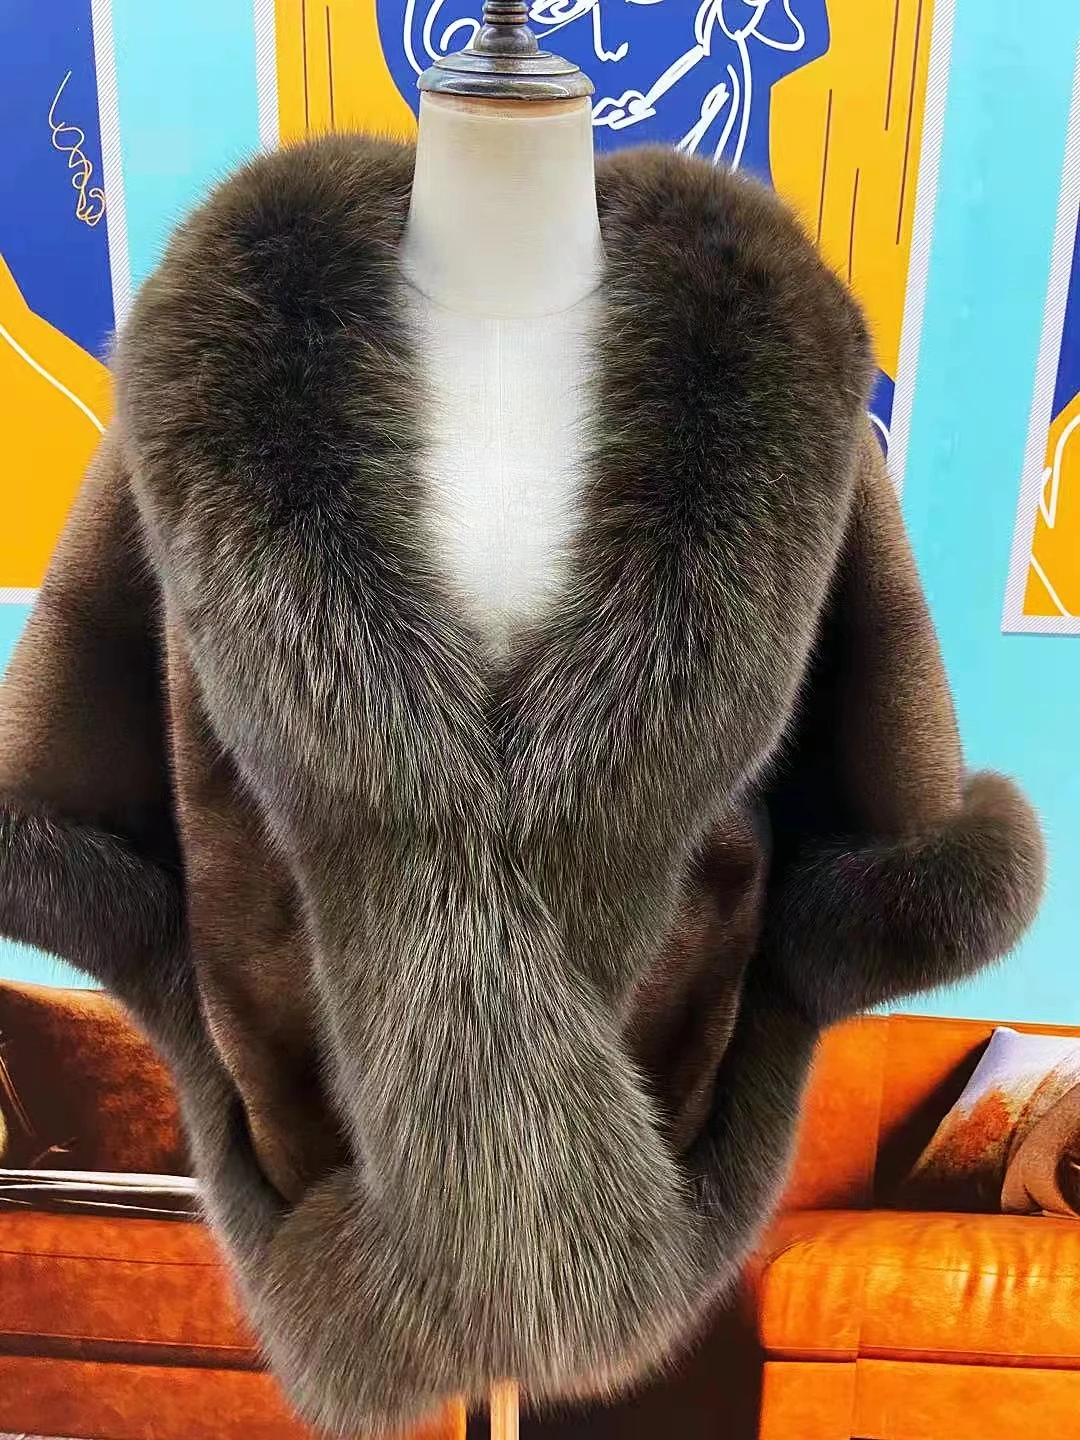 Aulande2021 New Natural Mink Fur Cape With Real Fox Fur Collar Cape Fashion Warm Women's Winter Coat Free Shipping enlarge